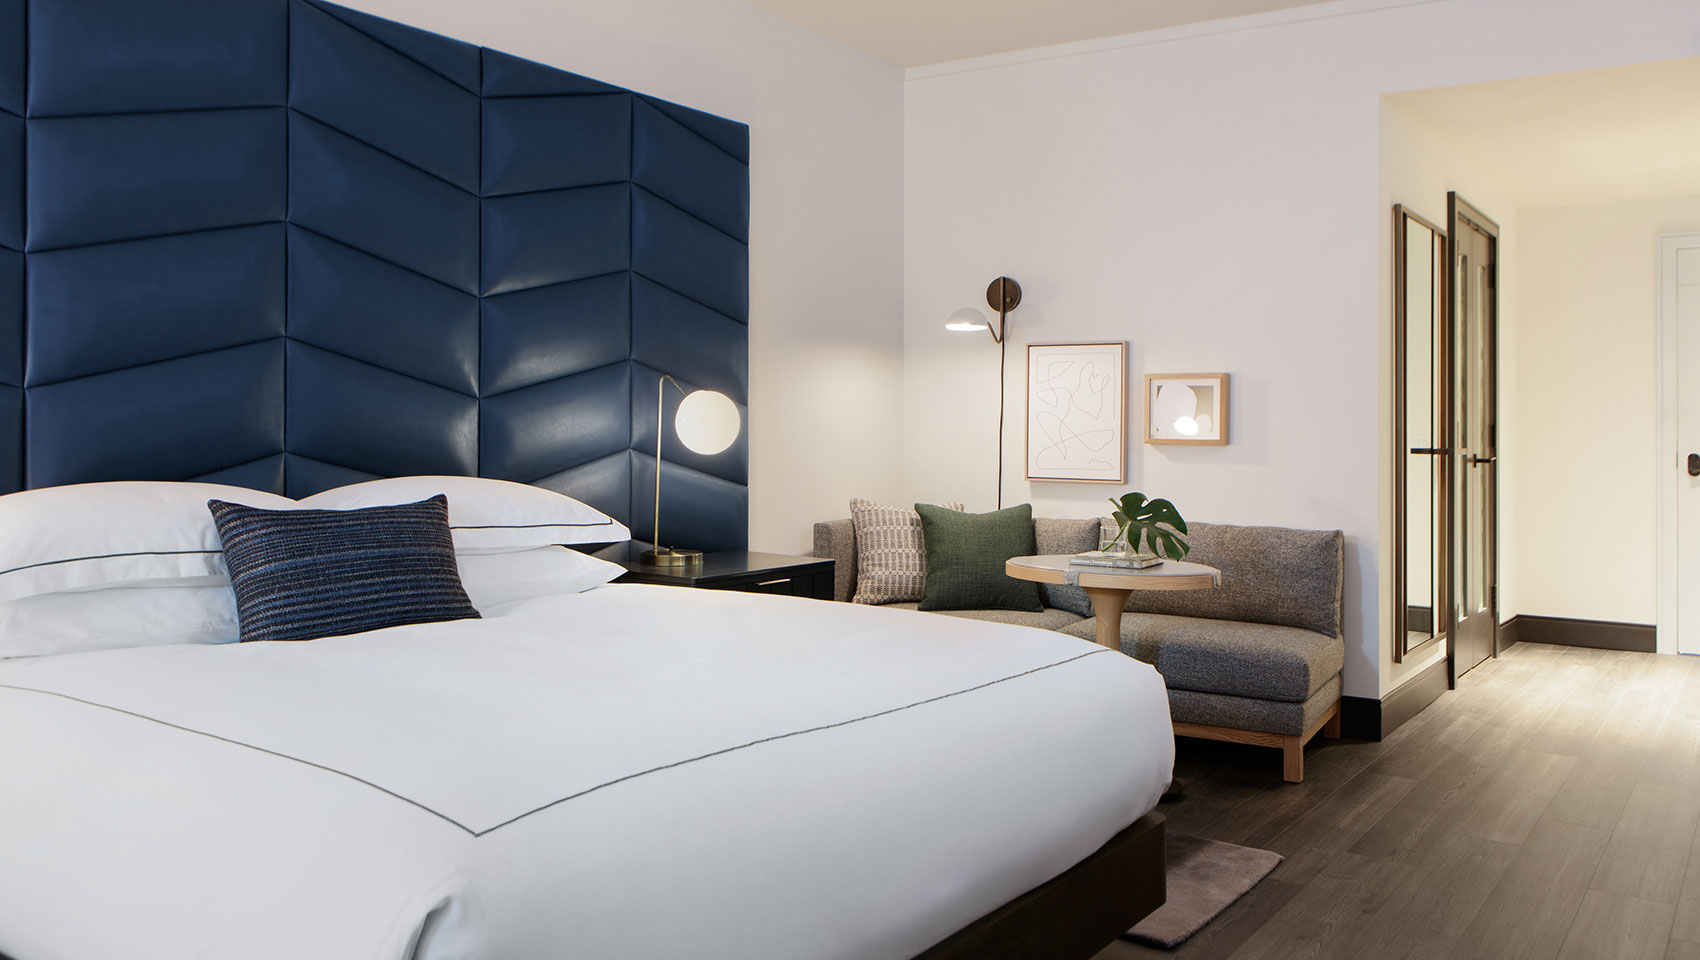 Kimpton Shane guestroom with large white king size bed and blue headboard